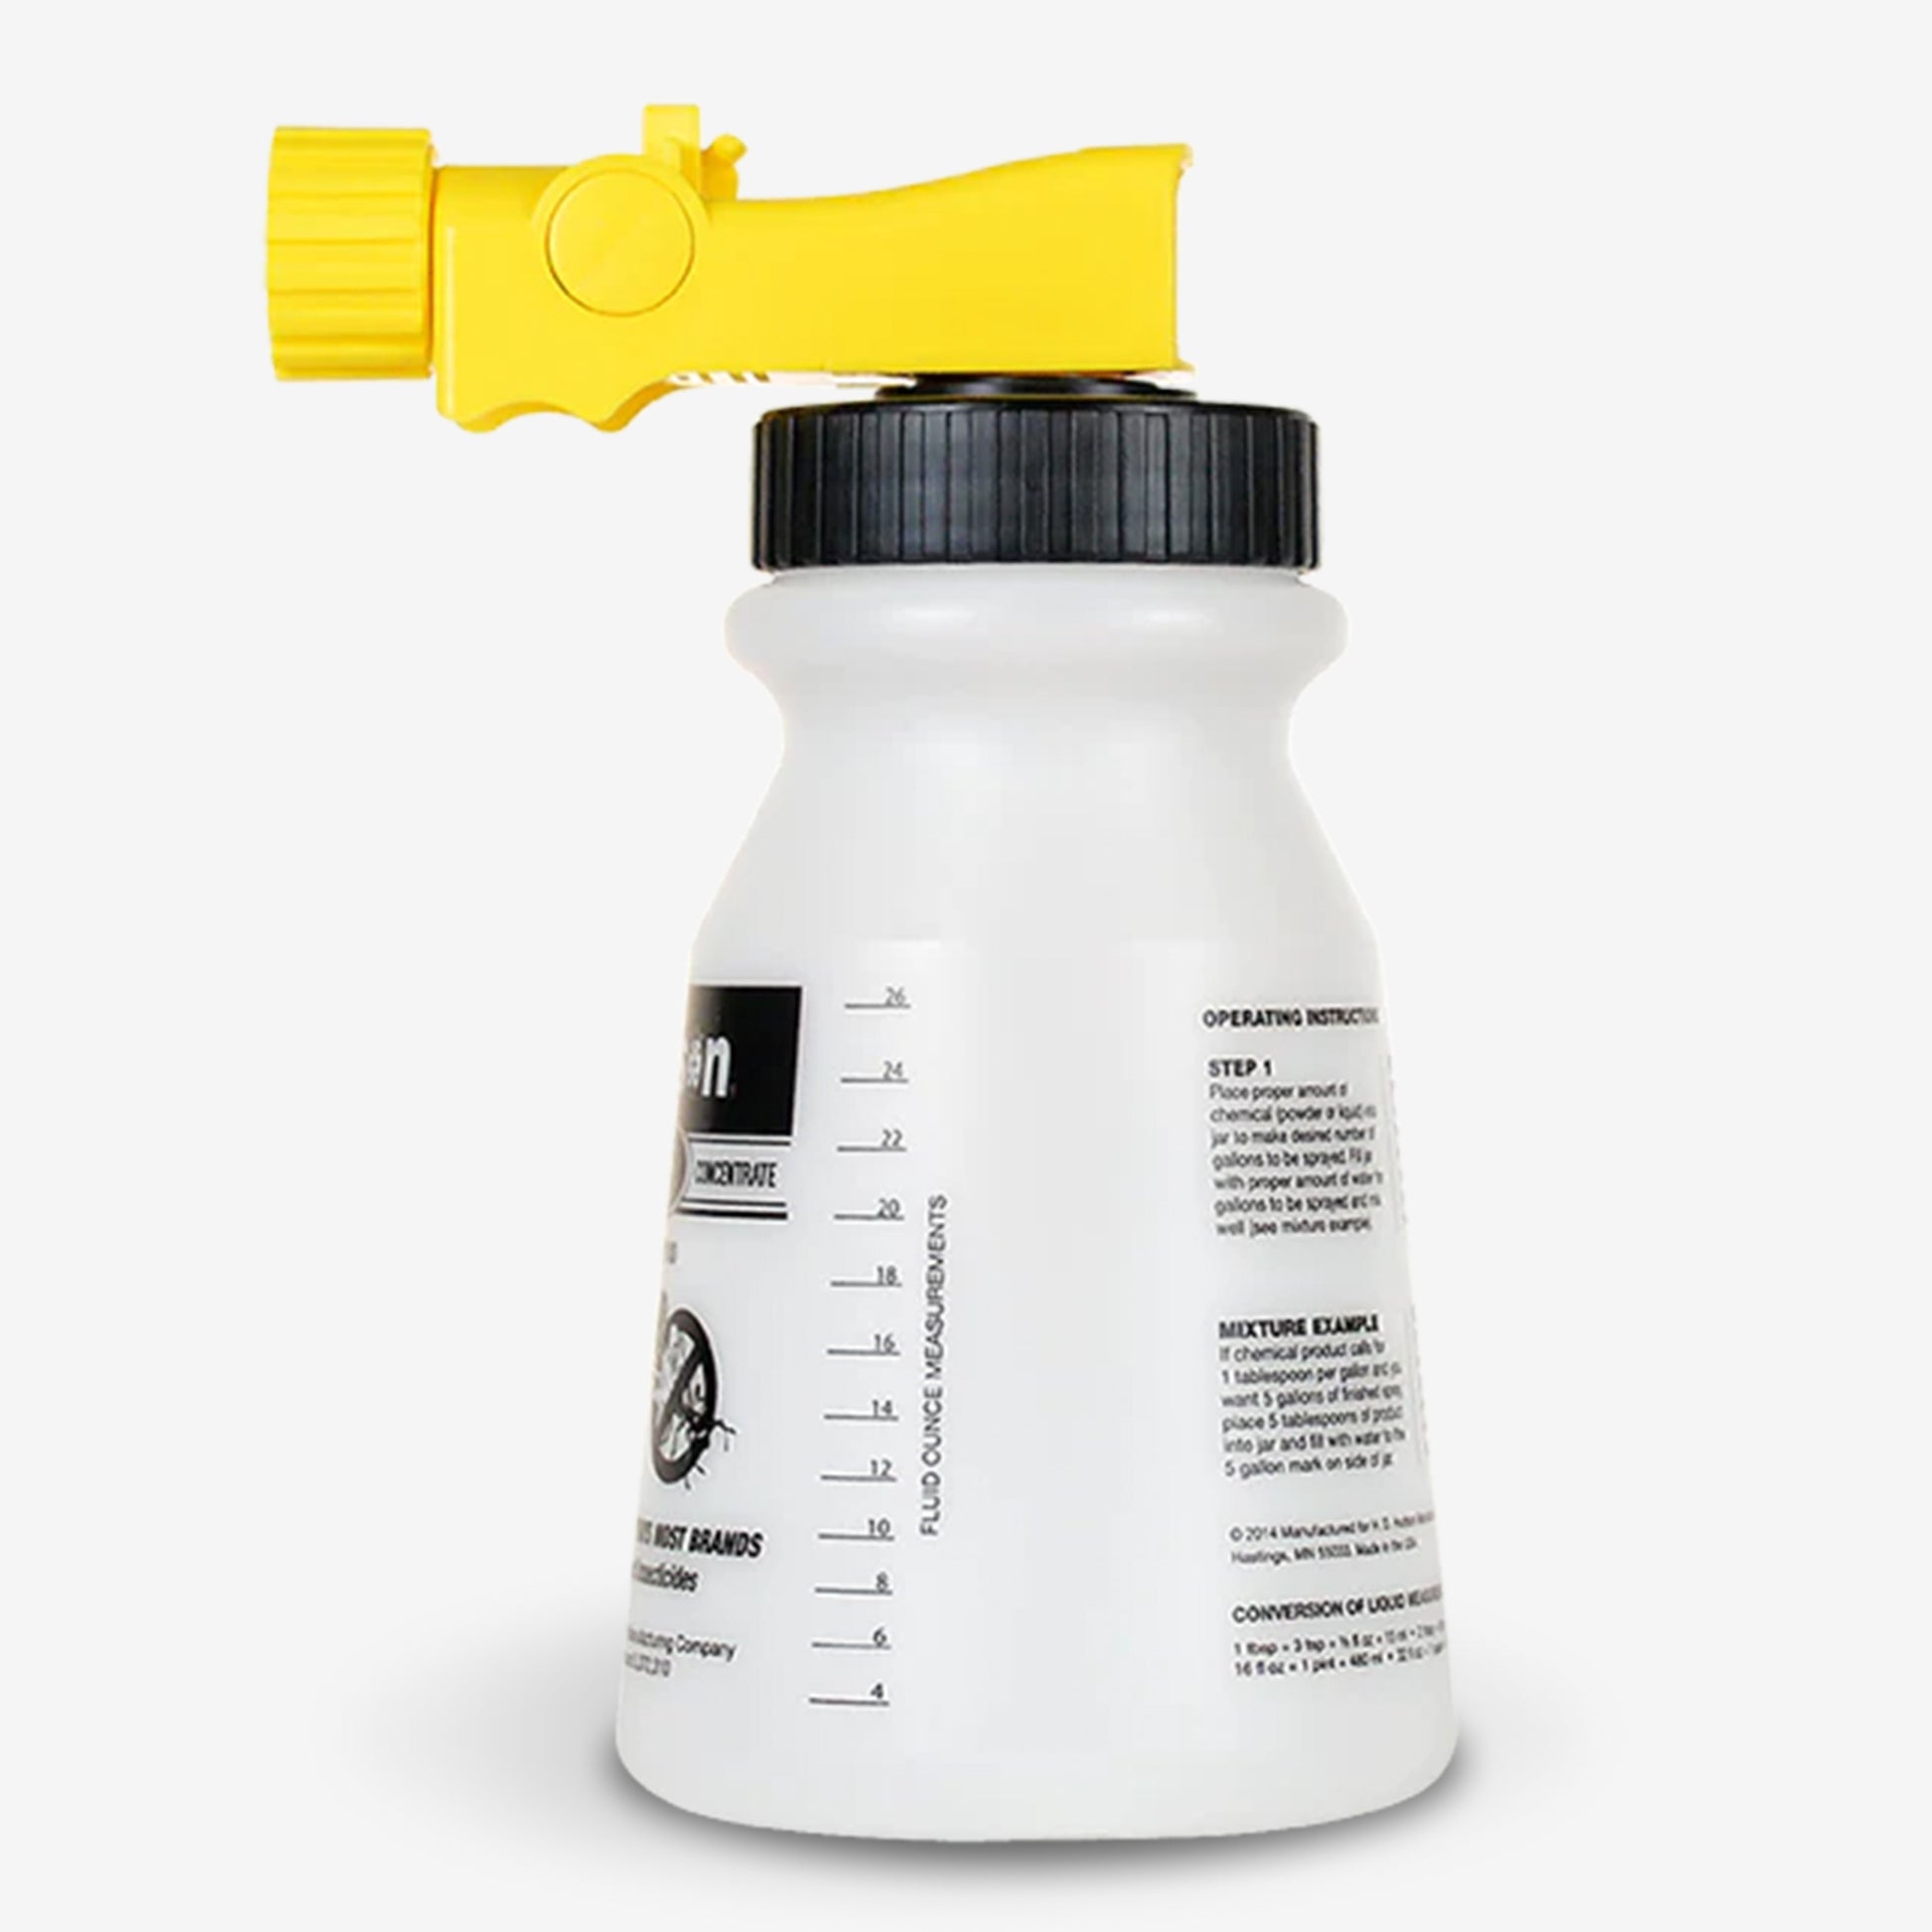 Combination Pack: 2 Gallons Salts Gone™ and Hose End Sprayer